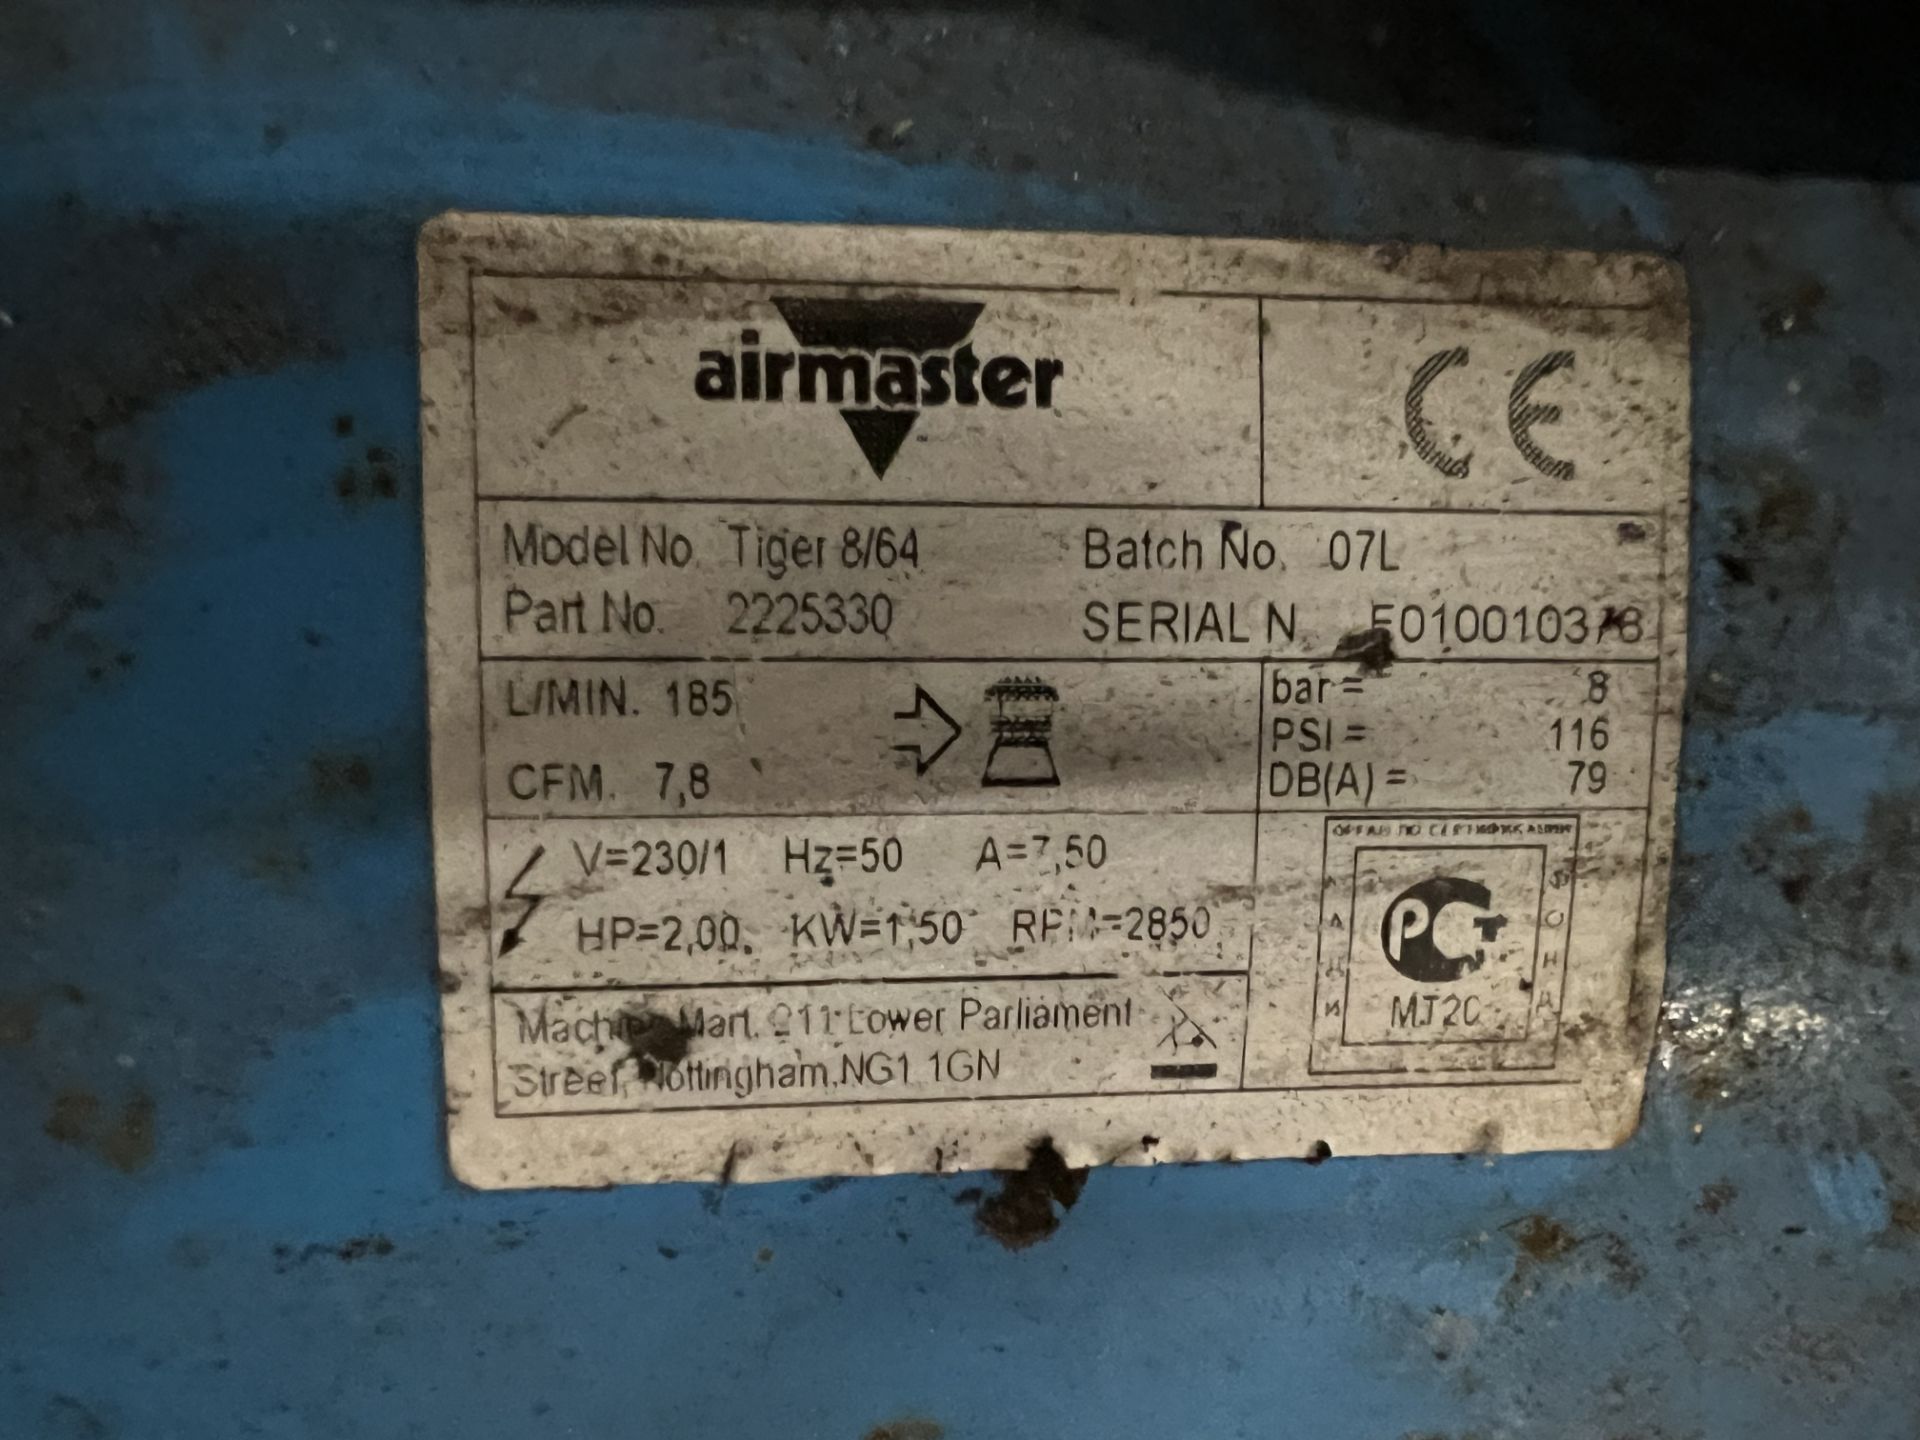 Airmaster Tiger 8/64 Turbo Compressor, lift out charge - £20 + VAT, lot located in Bury St - Bild 2 aus 3